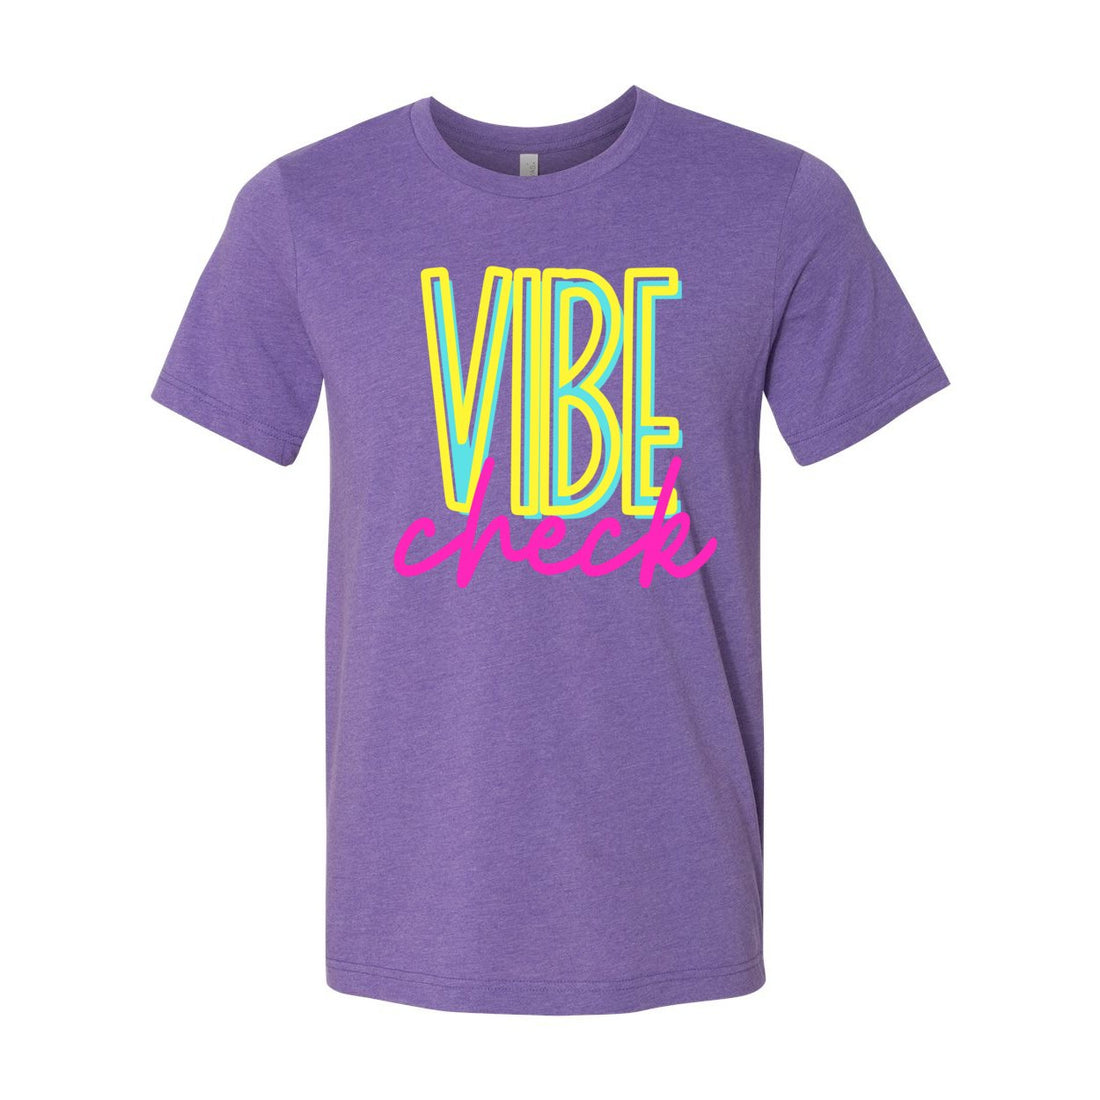 Vibe Check Jersey Tee - T-Shirts - Positively Sassy - Vibe Check Jersey Tee